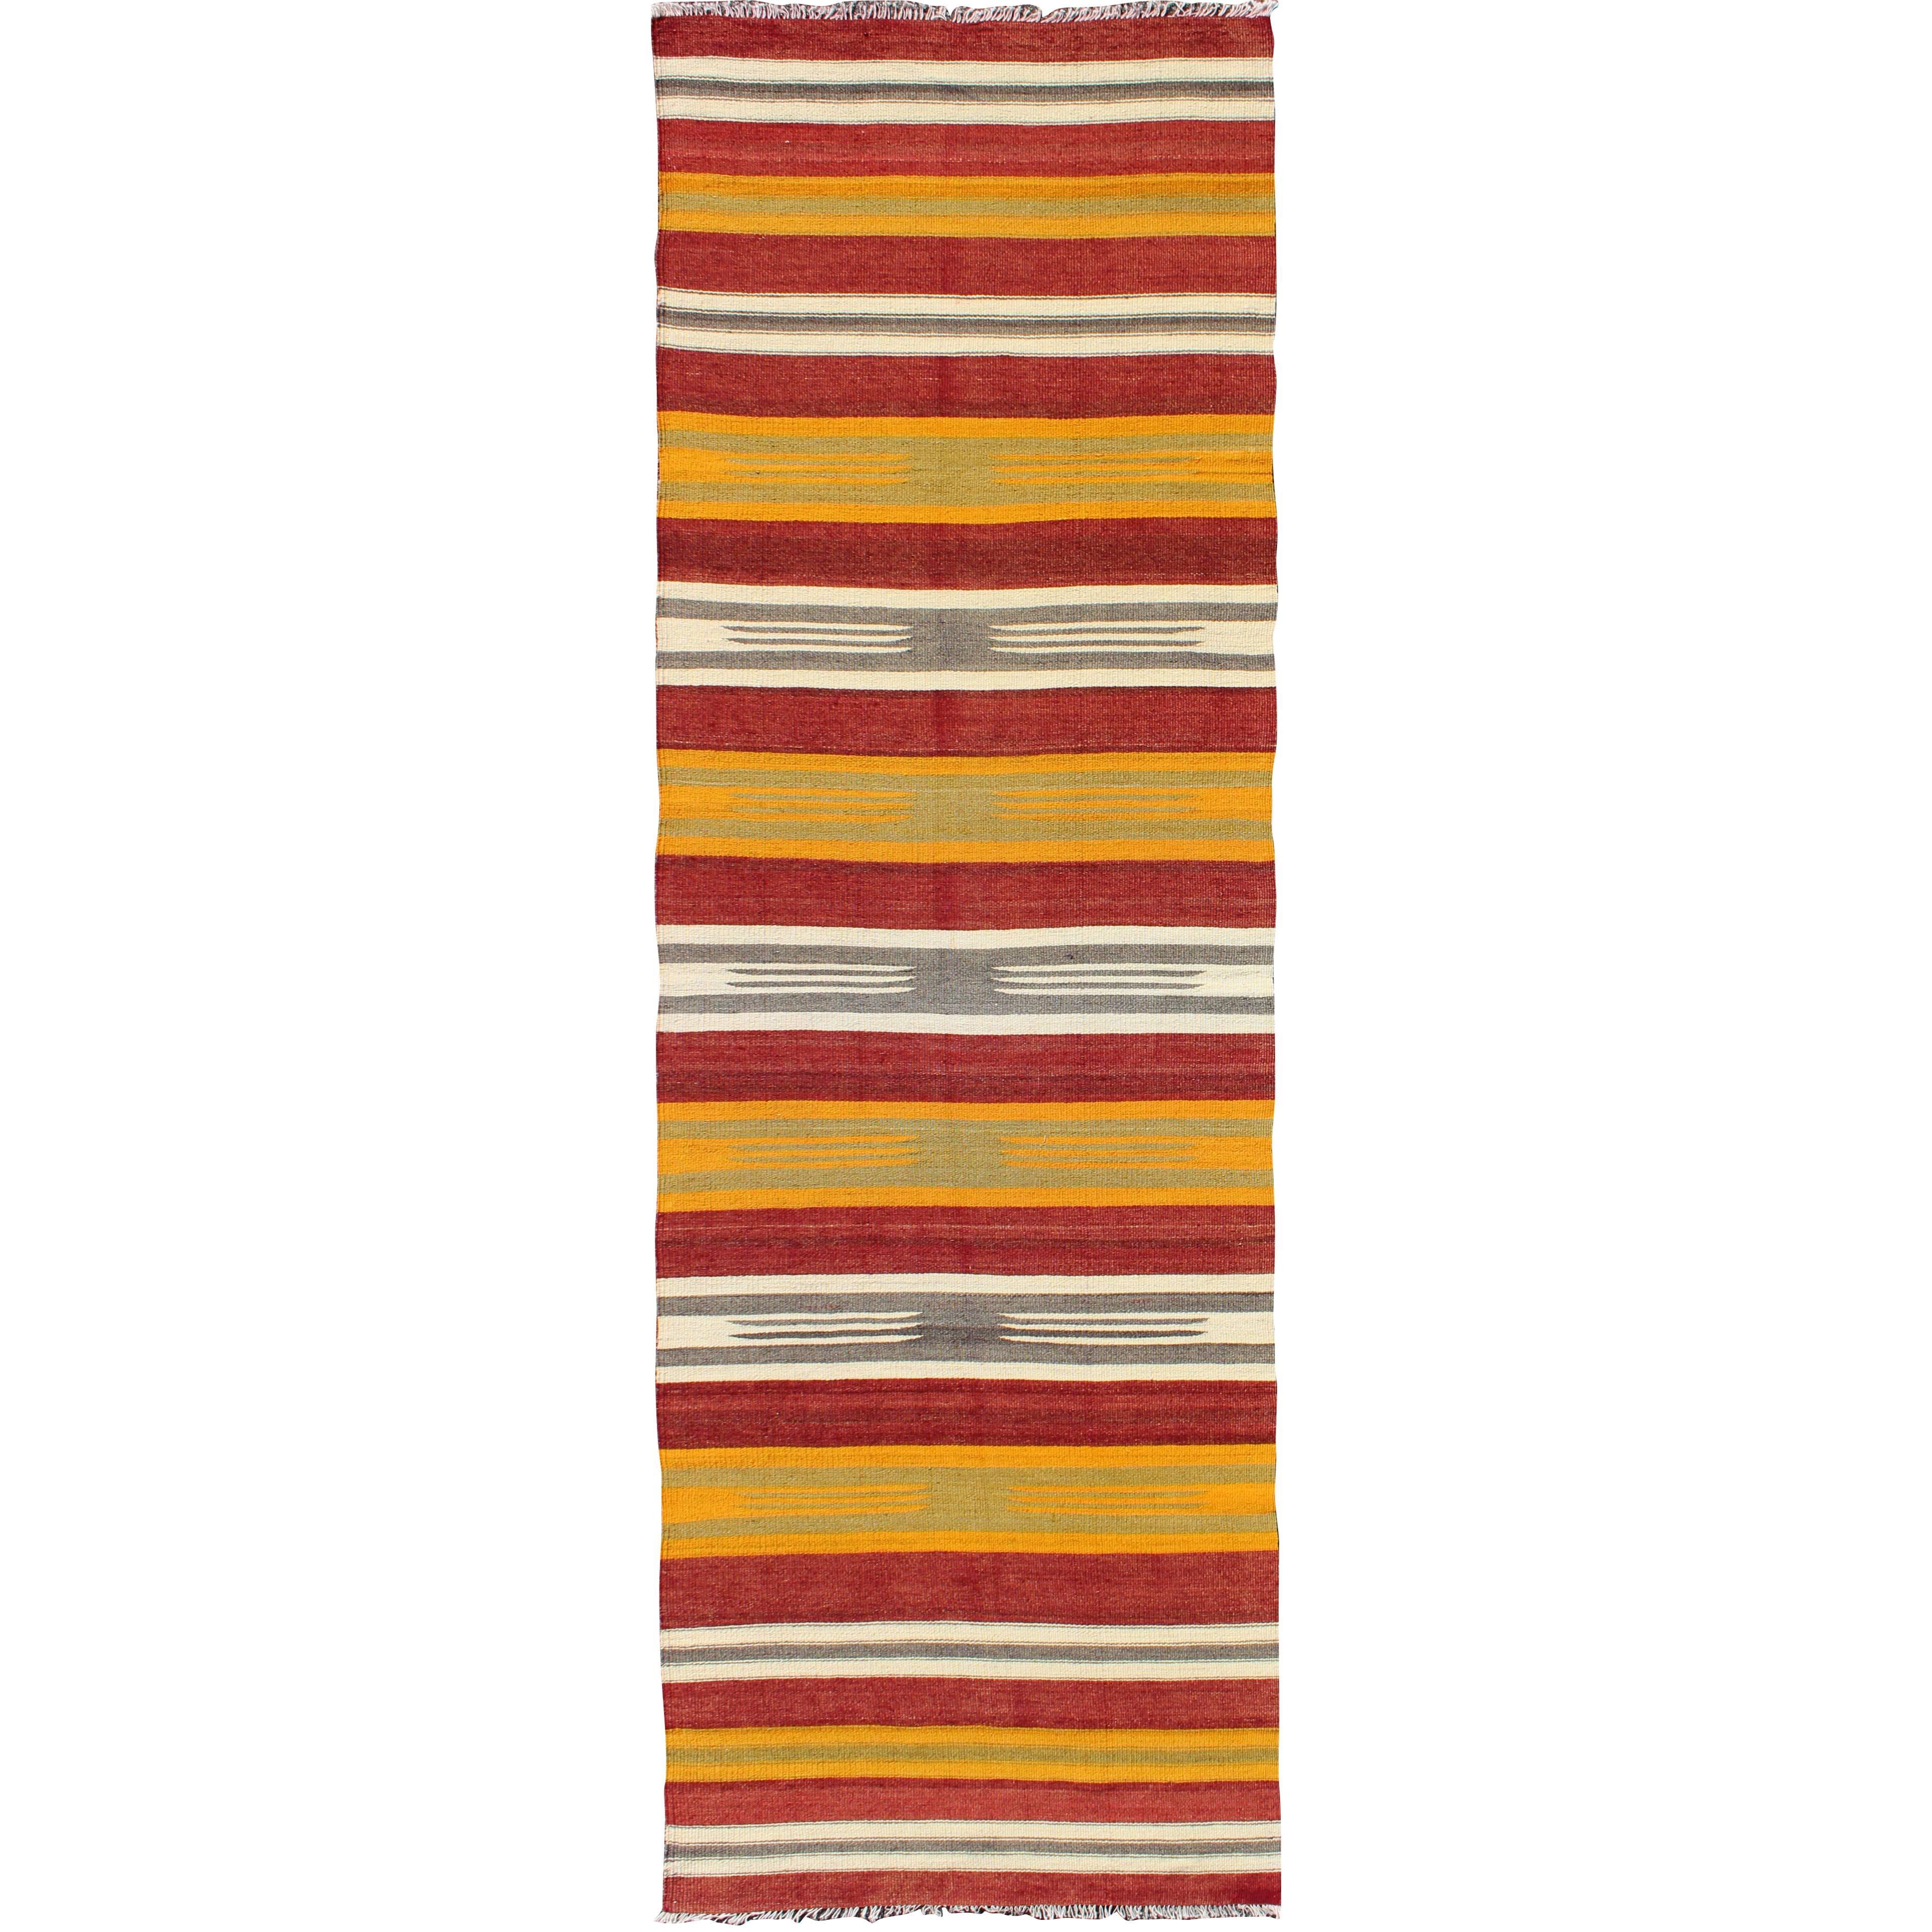 Vintage Turkish Kilim Runner with Stripes in Red, Green, Yellow, Ivory, Gray